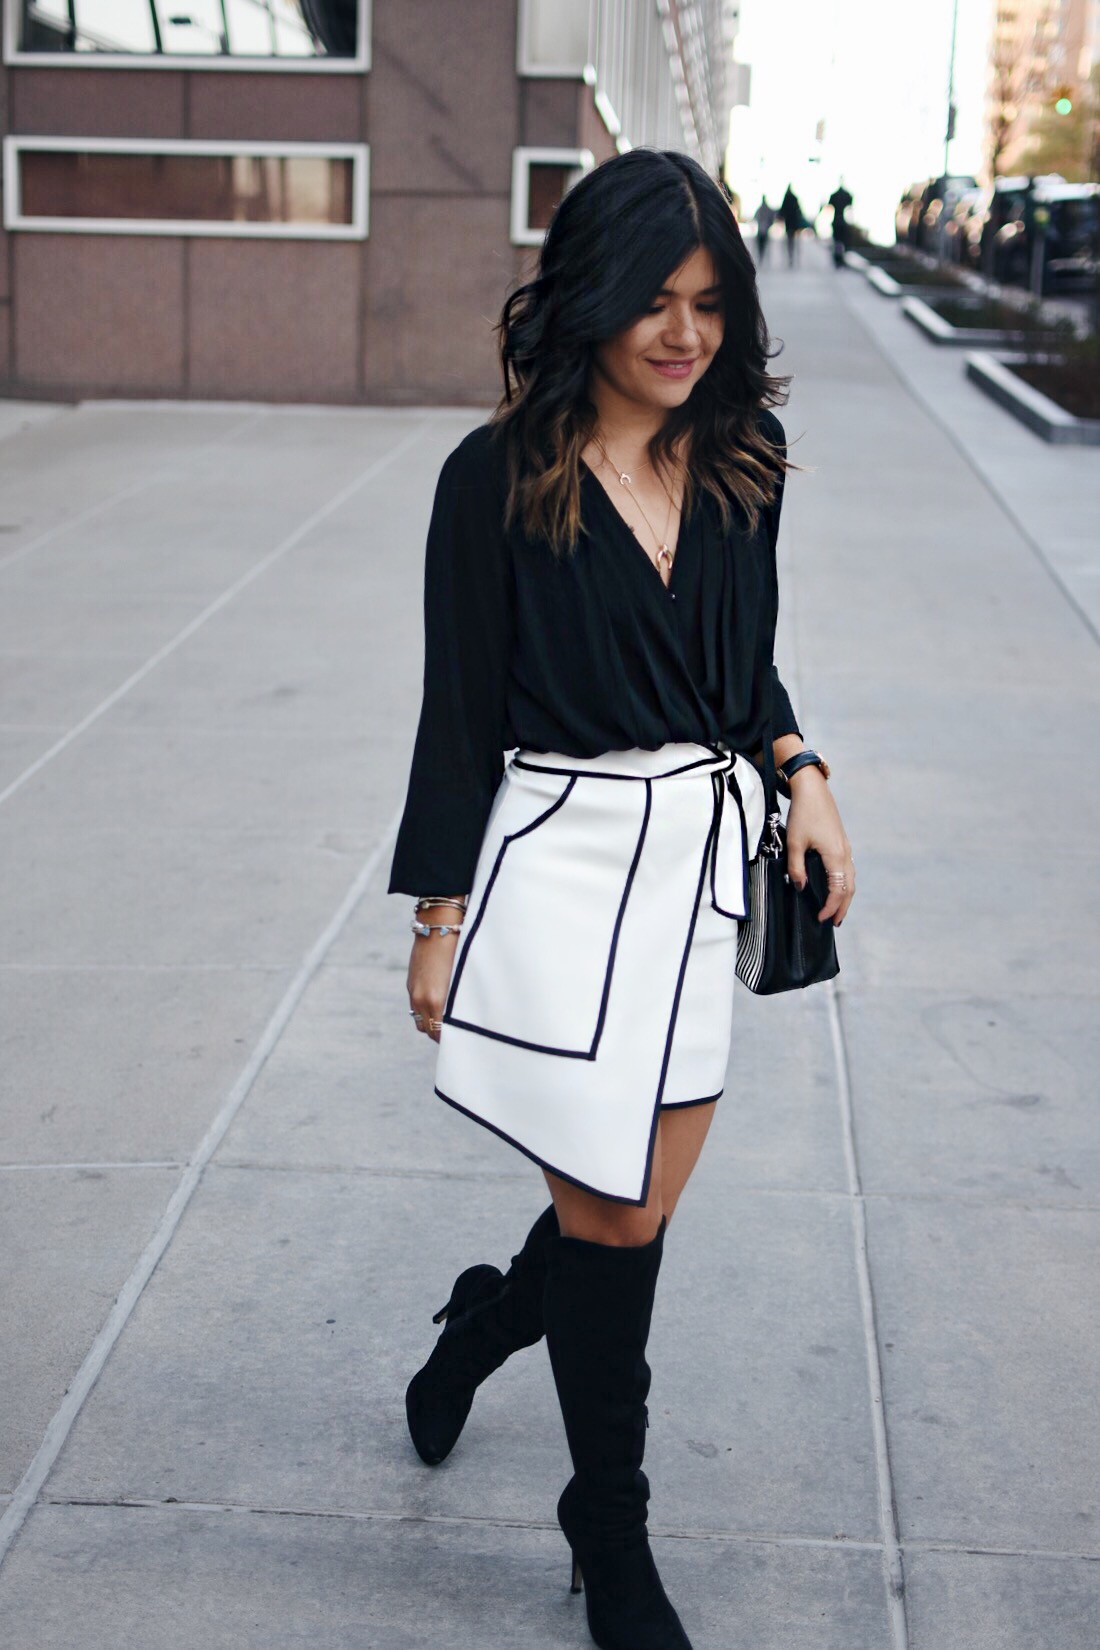 Carolina Hellal of Chic Talk wearing a white asymmetrical Chicwish skirt, Forever21 chiffon top and Suede Knee high boots.